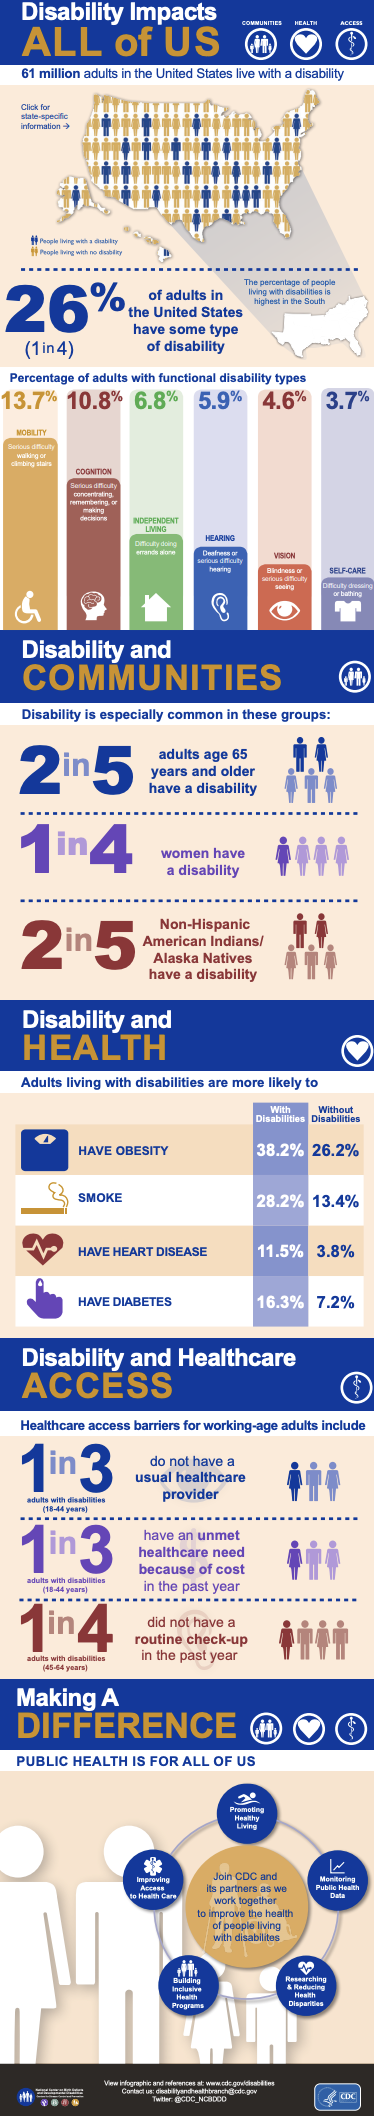 Disability Impacts All of Us Infographic